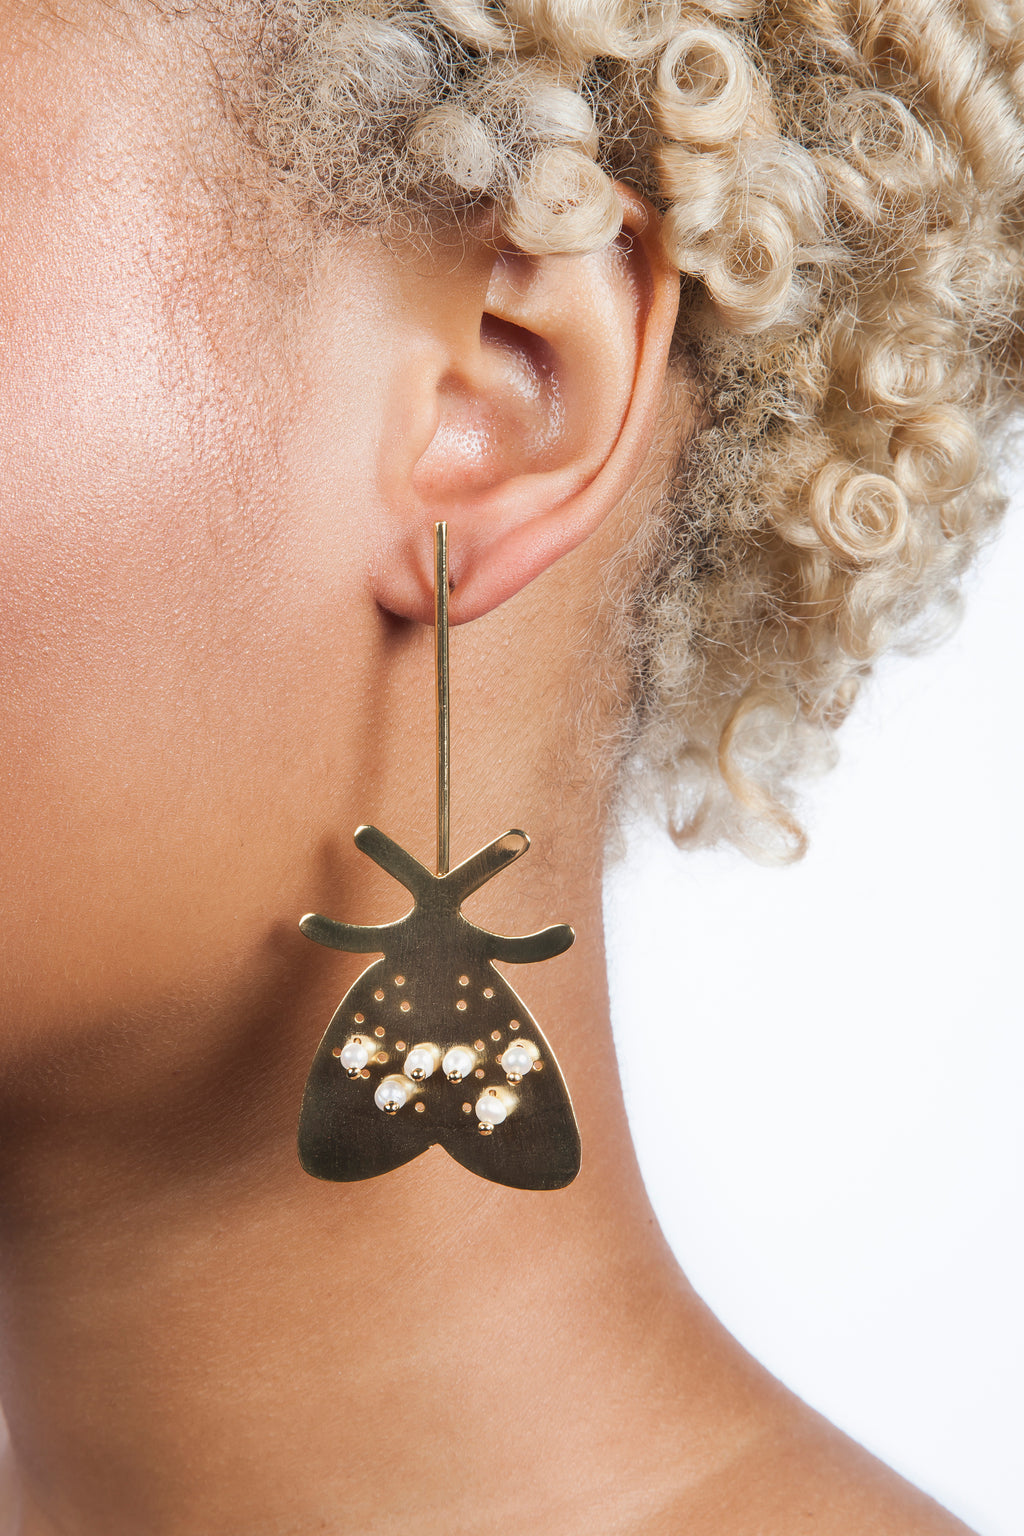 Colombian Jewelry Gold Moth Earrings Insect Jewelry 